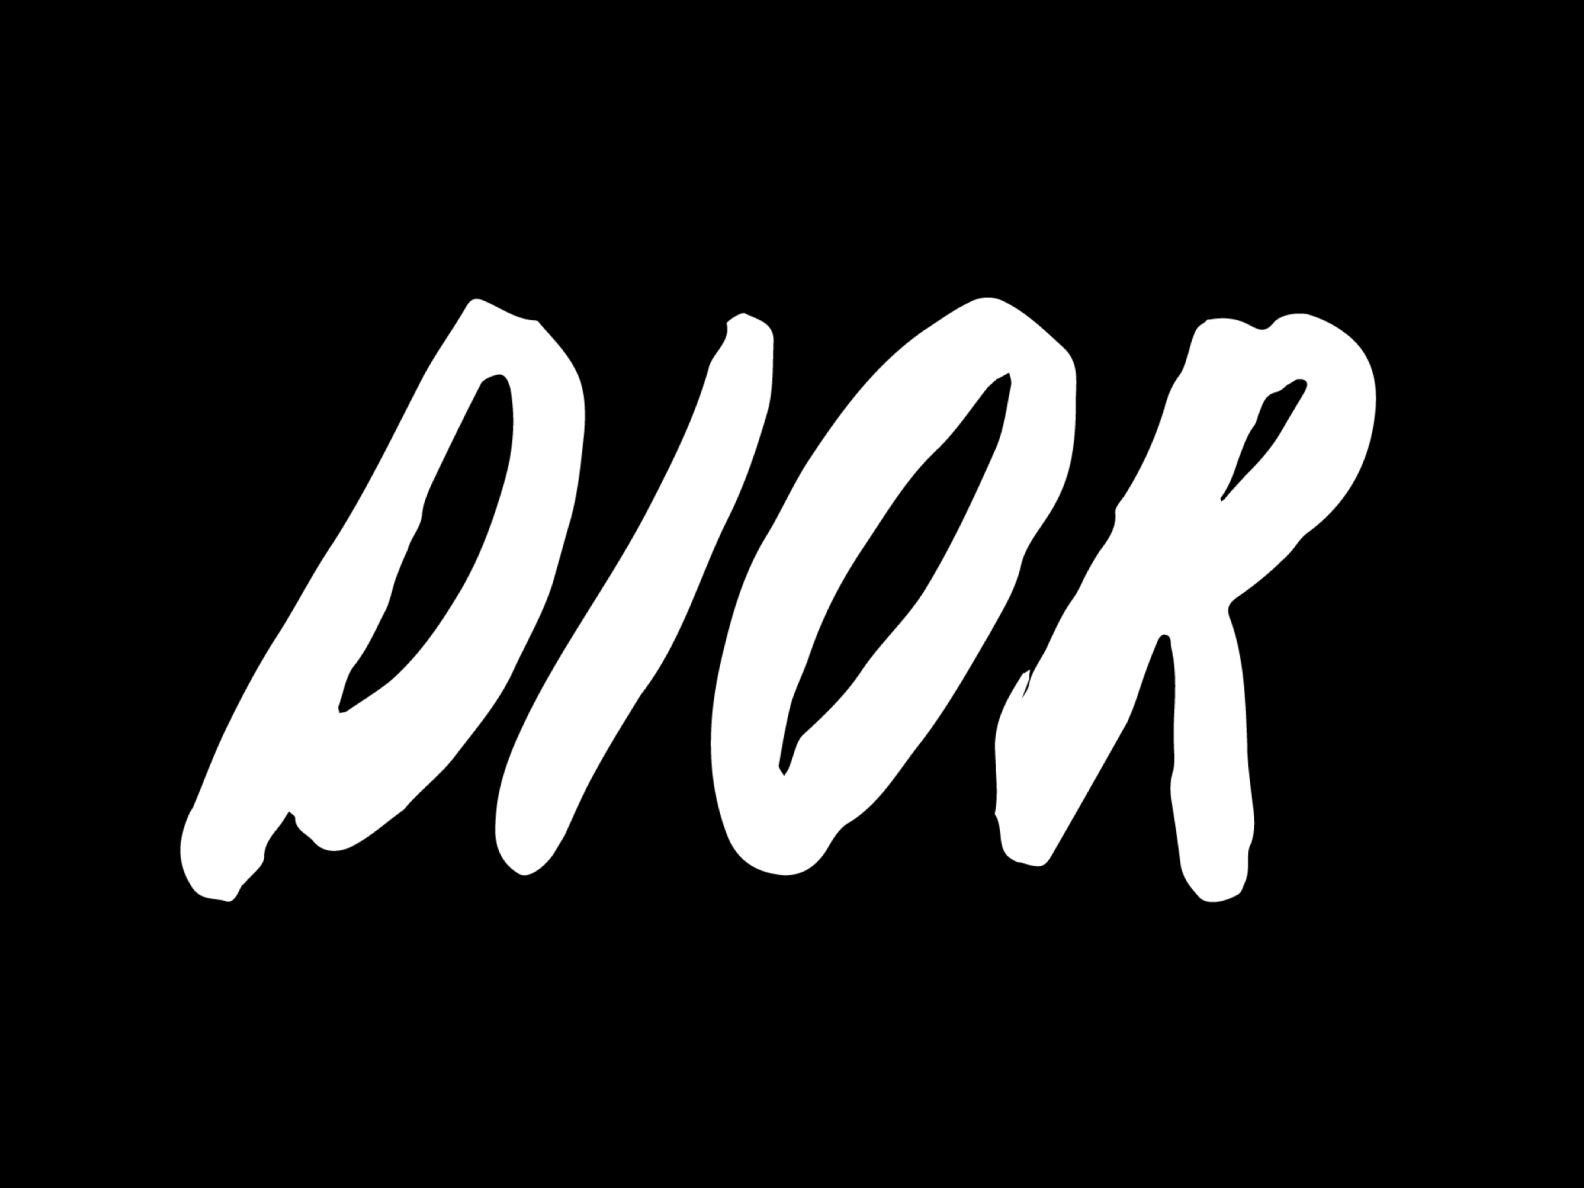 Dior London Launch by Nastia Piven on Dribbble